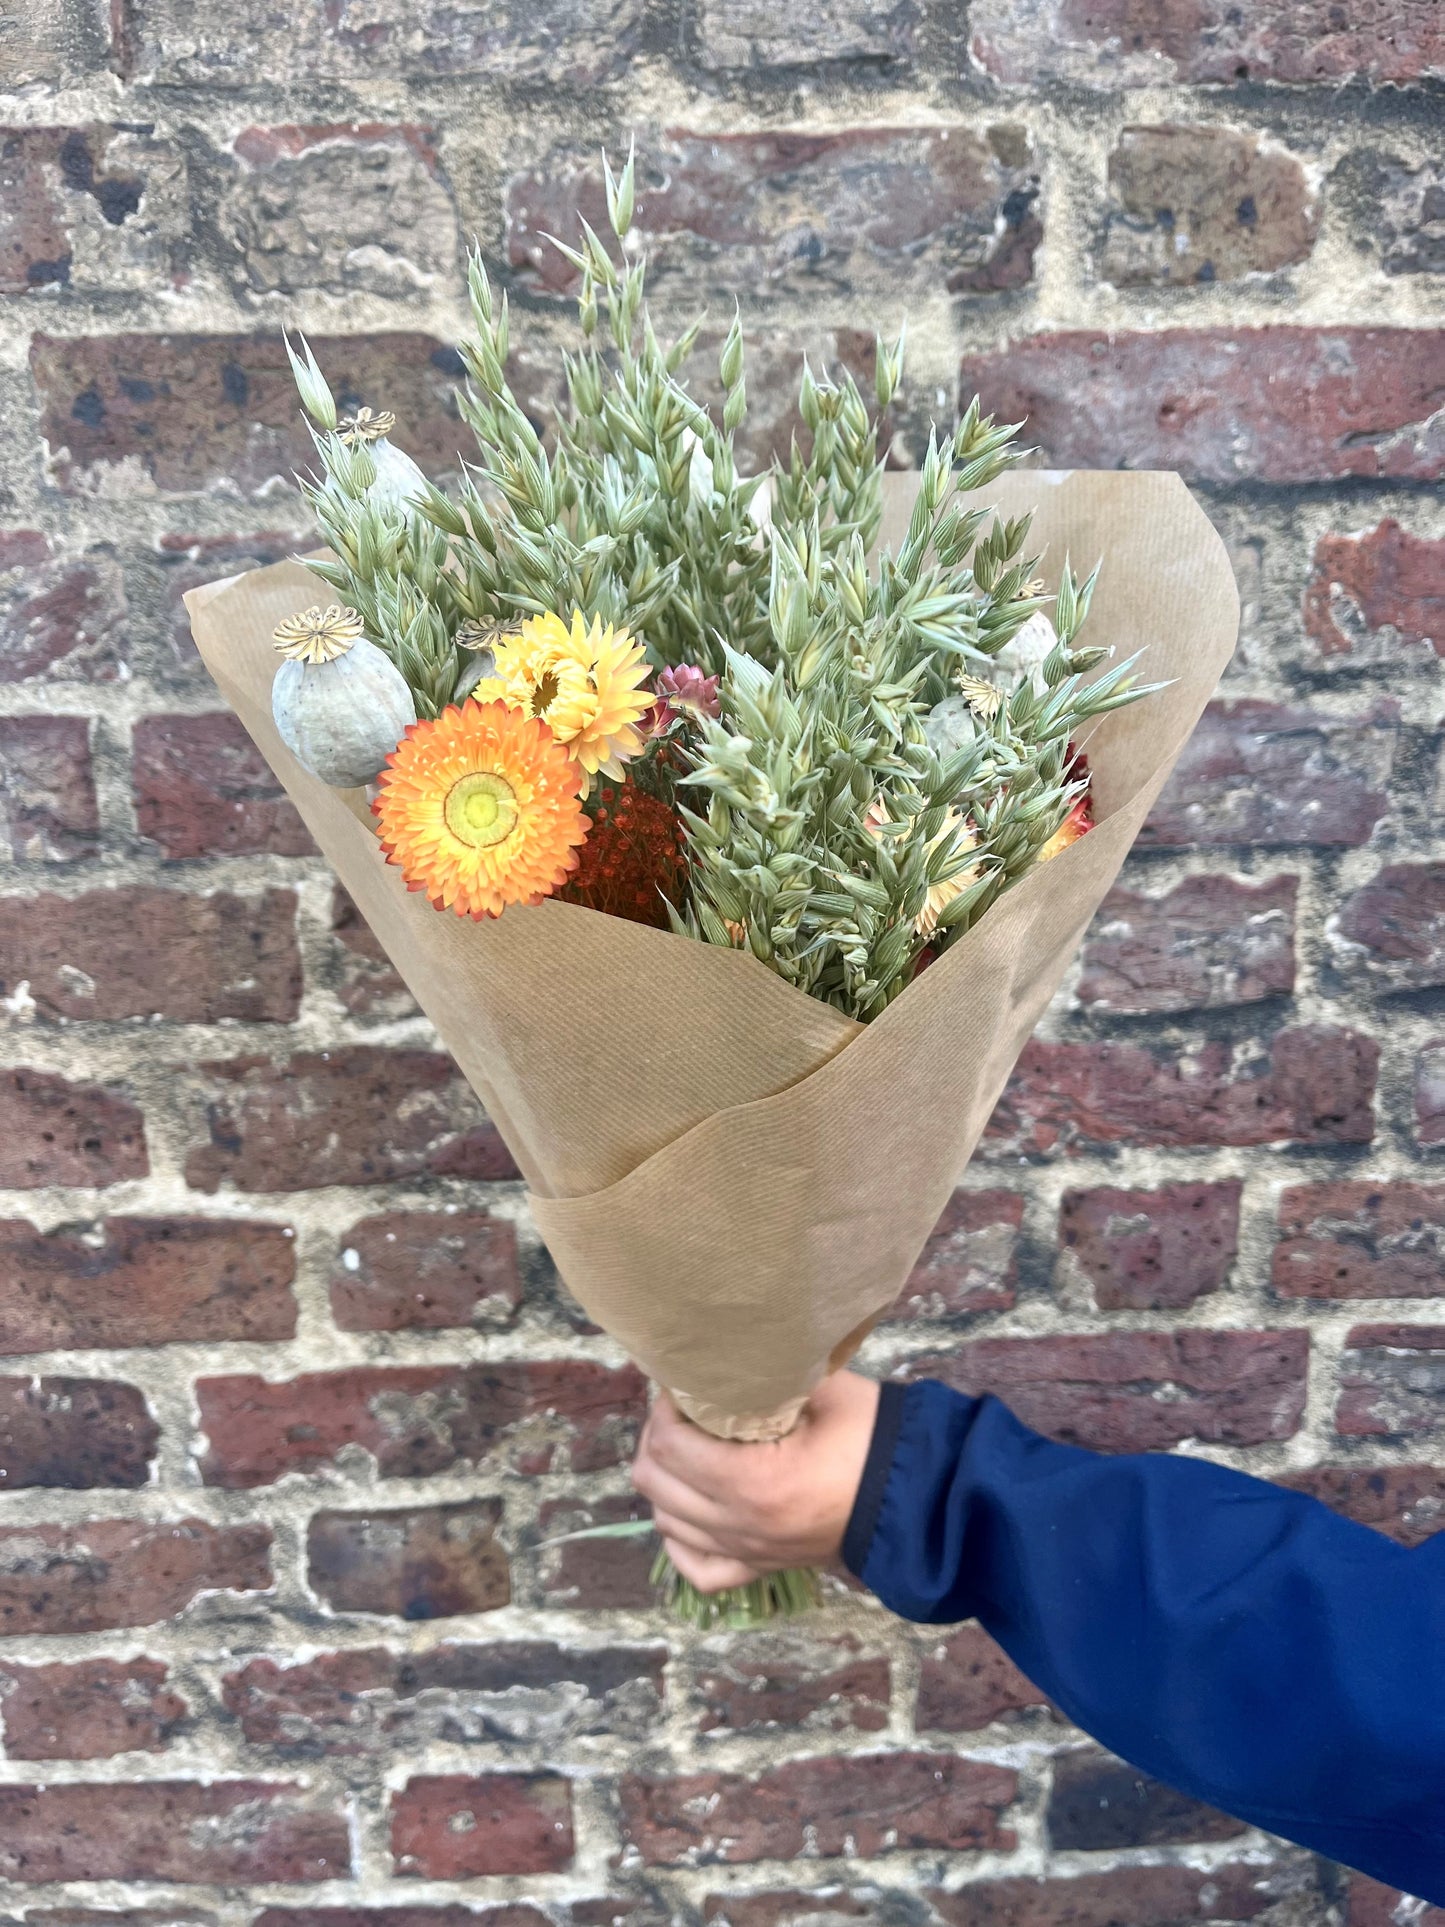 Dried flower bunch - Natural, peach & red